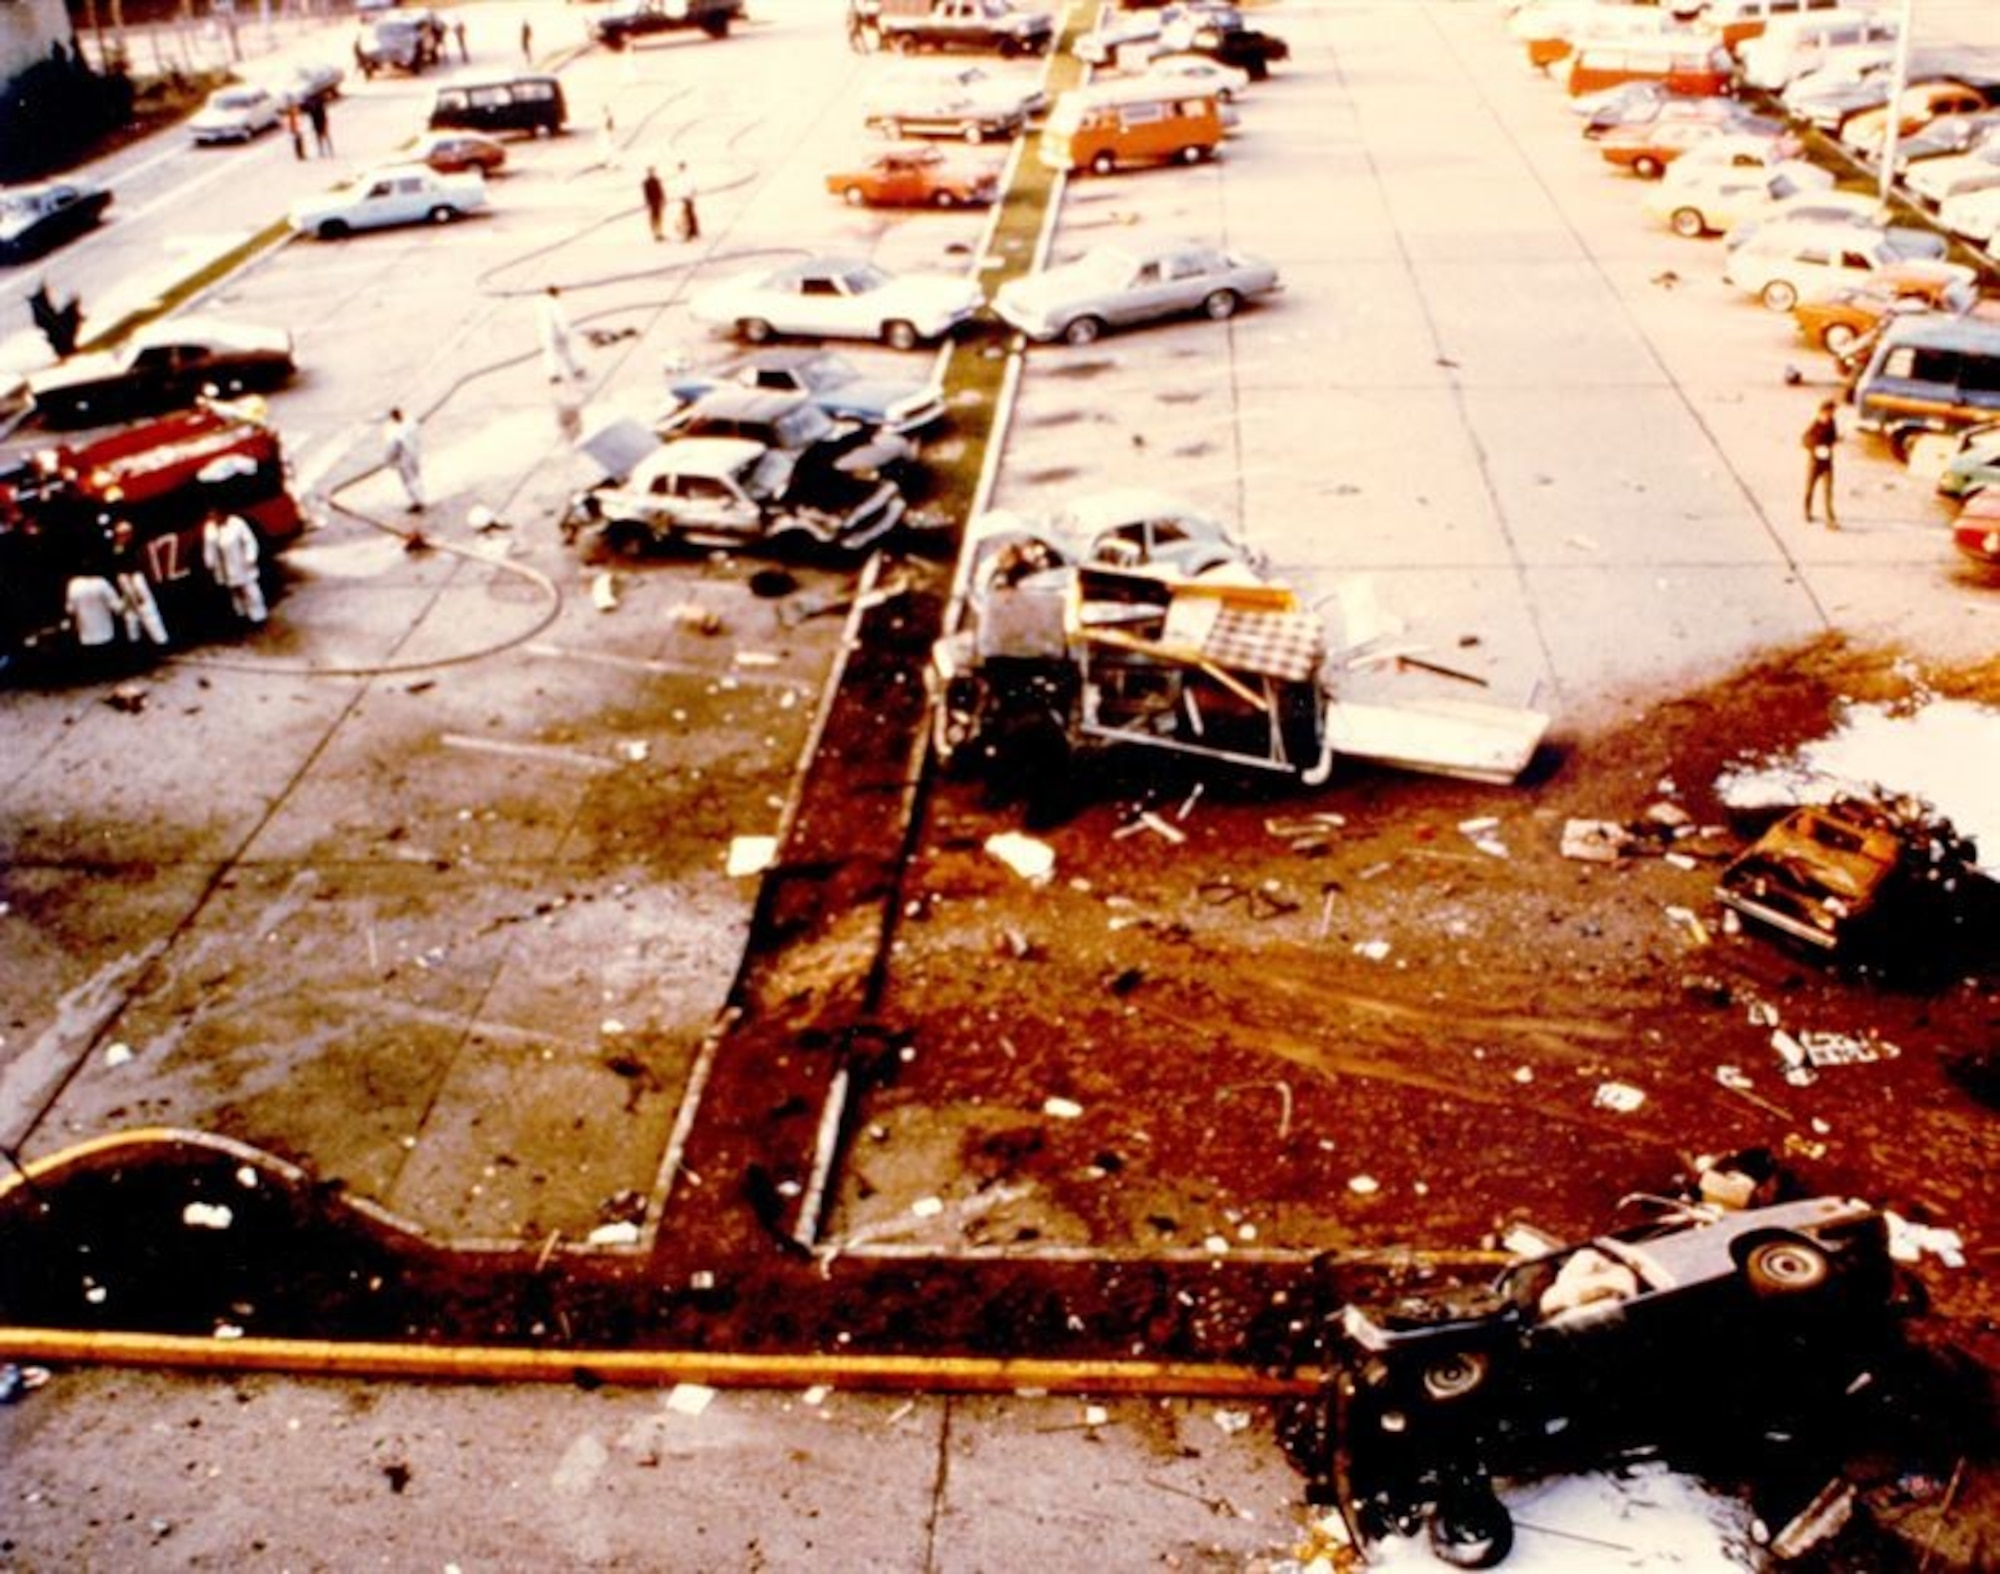 This is the aftermath of the 1981 Red Army Faction bombing of U.S. Air Forces Europe headquarters at Ramstein Air Base, Germany. OSI agents were involved with the terrorist investigation that followed. (U.S. Air Force photo)